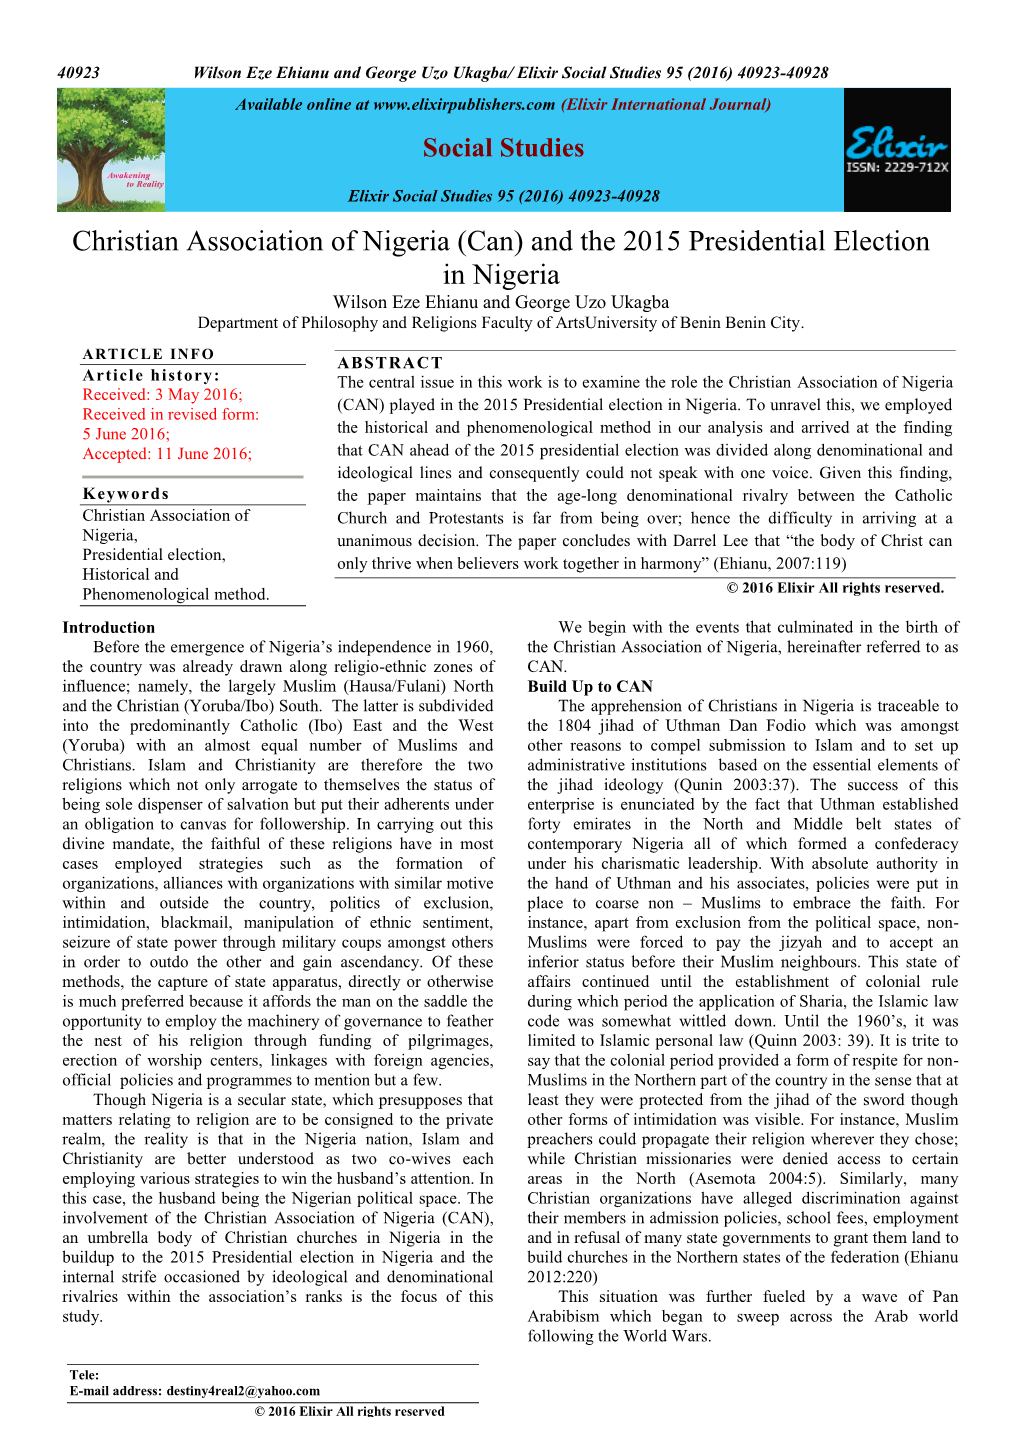 Christian Association of Nigeria (Can) and the 2015 Presidential Election in Nigeria